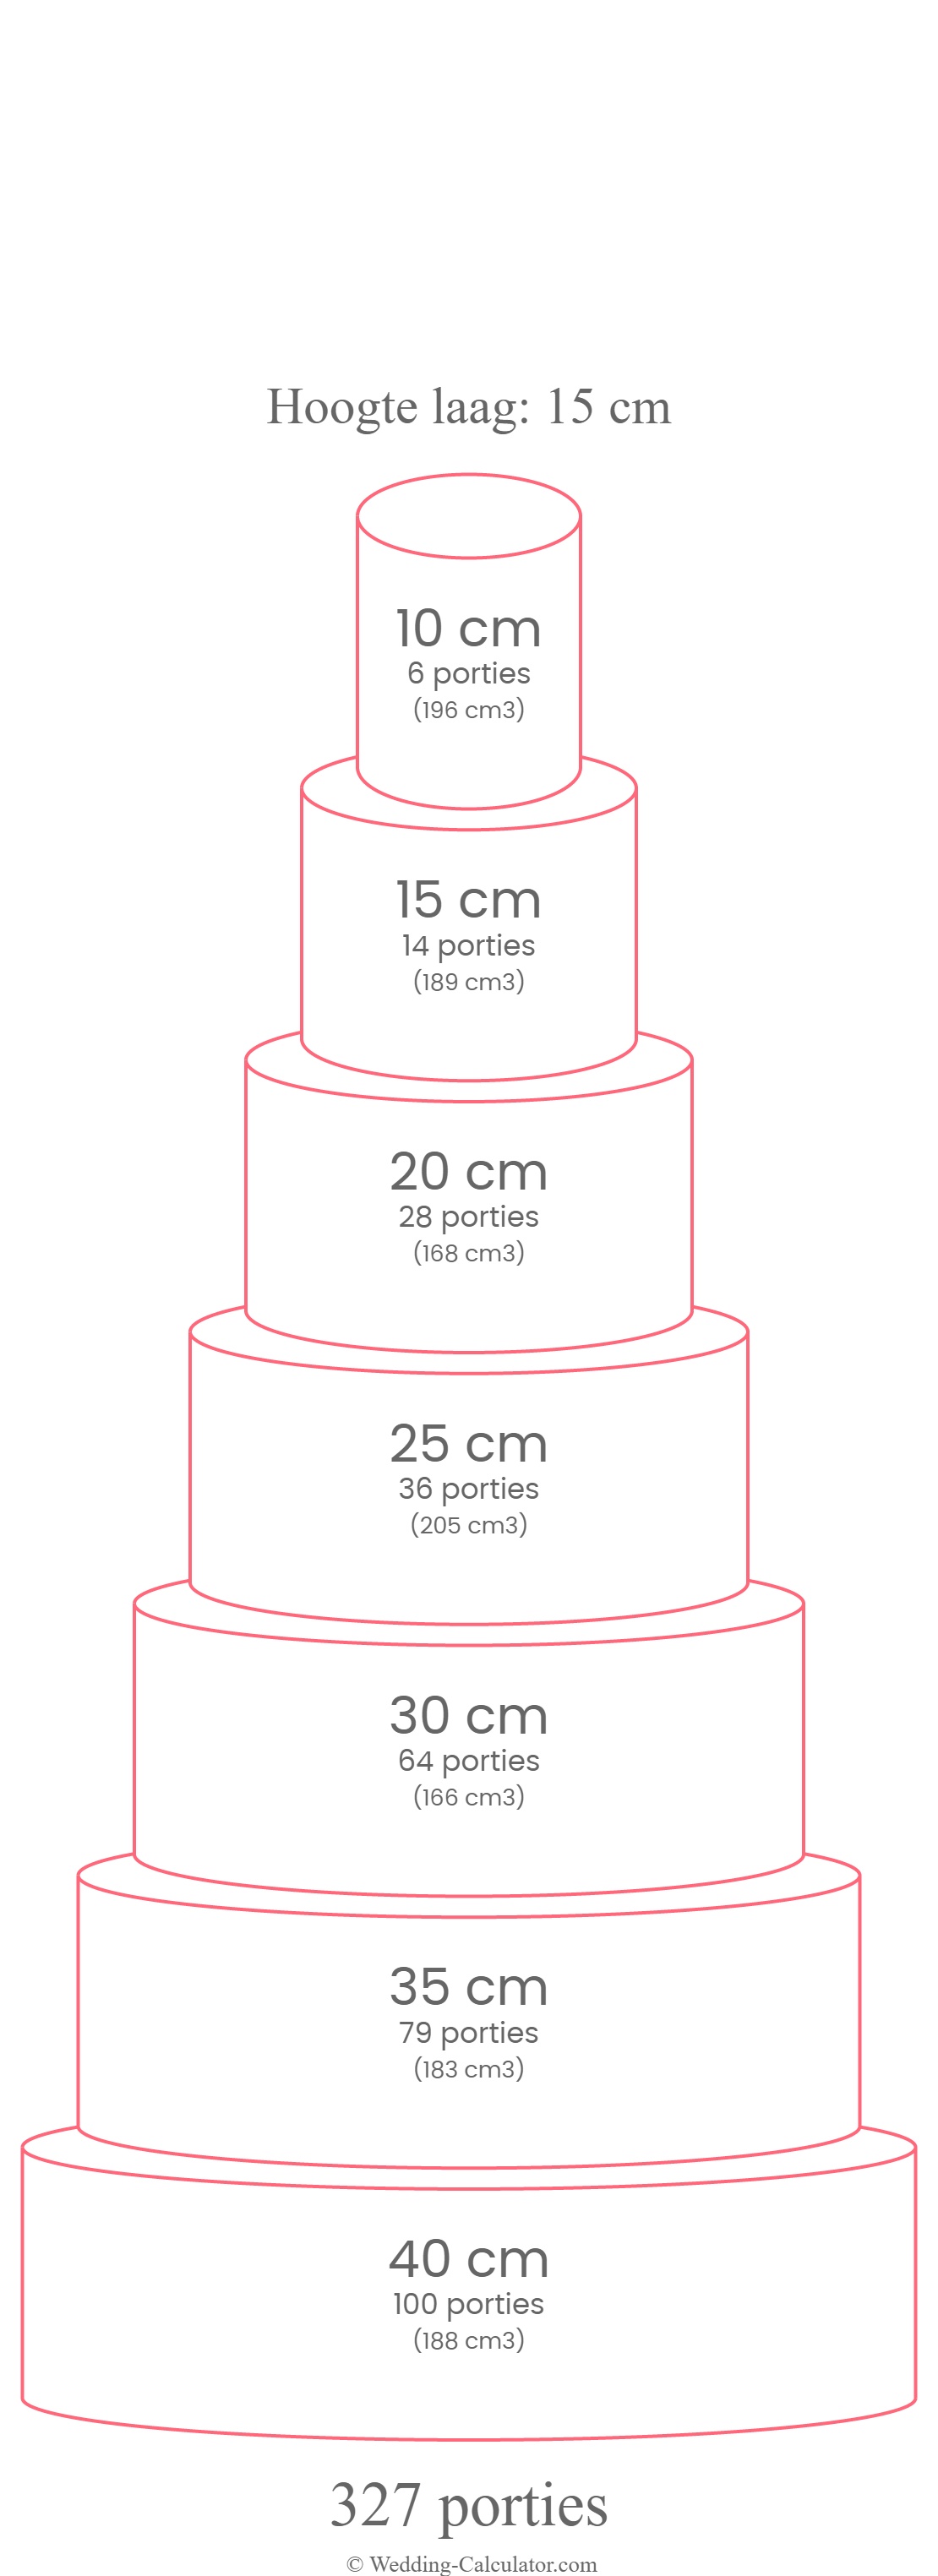 Servings chart for a round 7 tier wedding cake for 327 servings with 40 cm, 35 cm, 30 cm, 25 cm, 20 cm, 15 cm & 10 cm diameter tiers